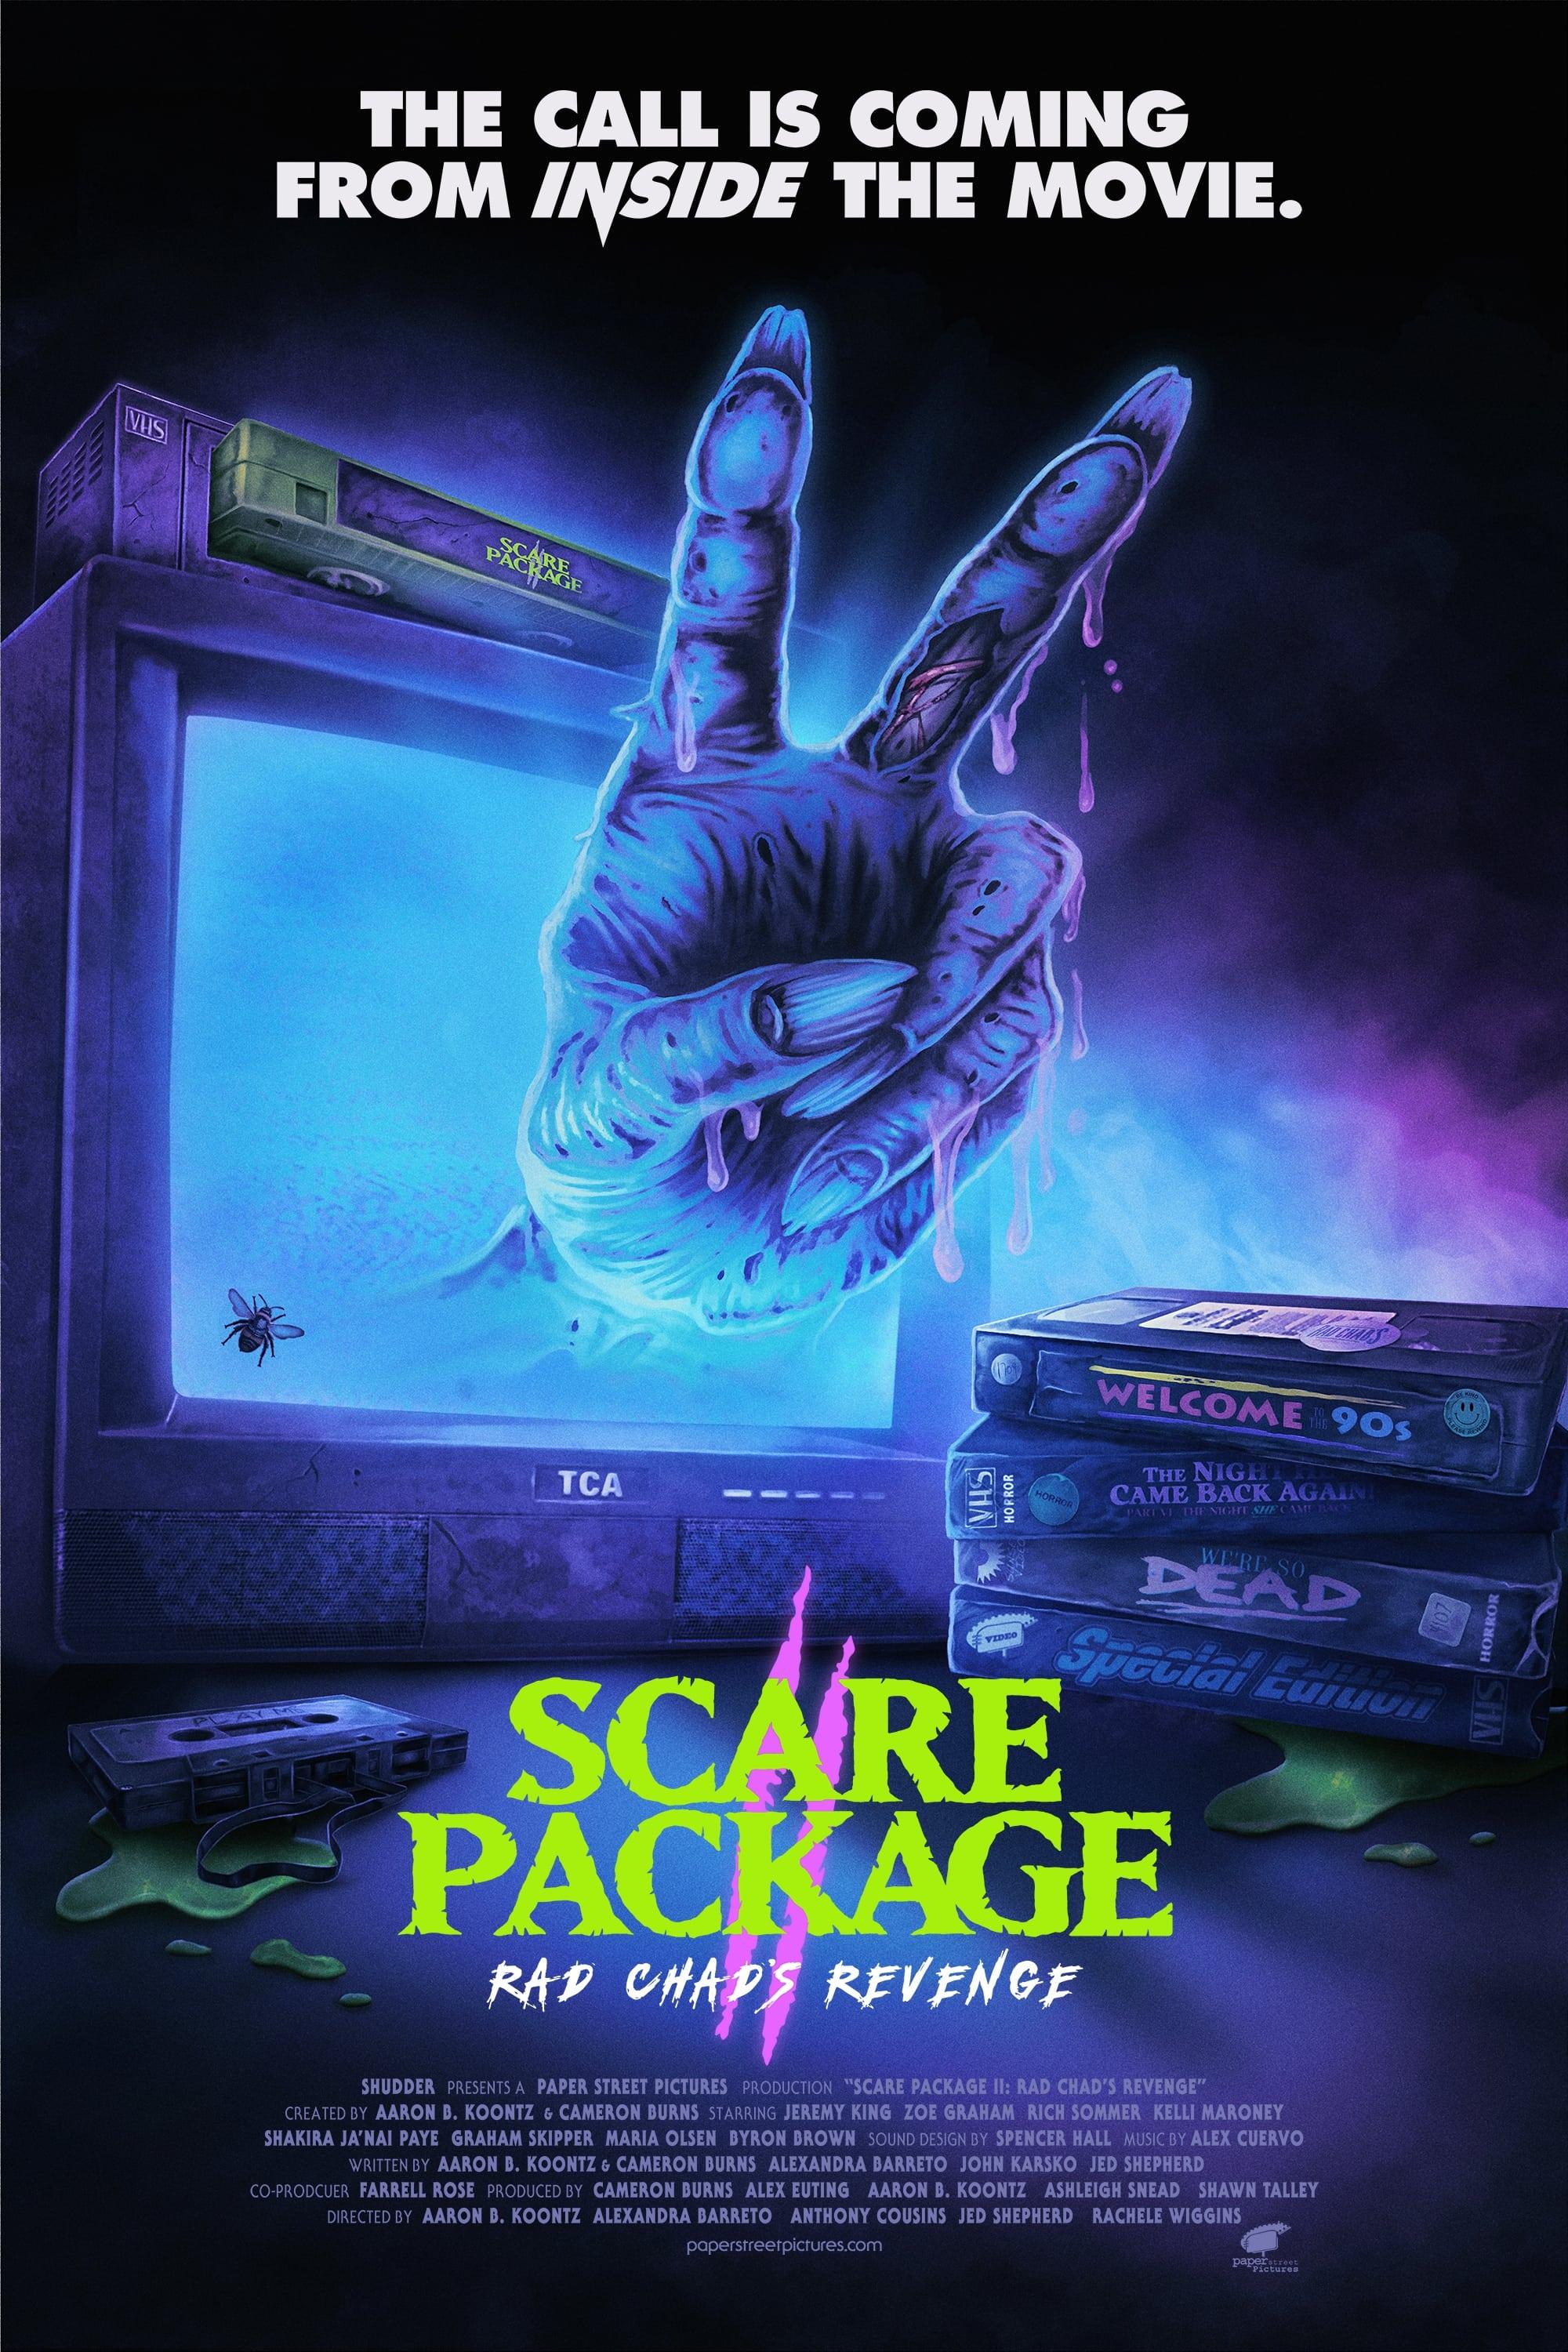 Scare Package II: Rad Chad’s Revenge poster